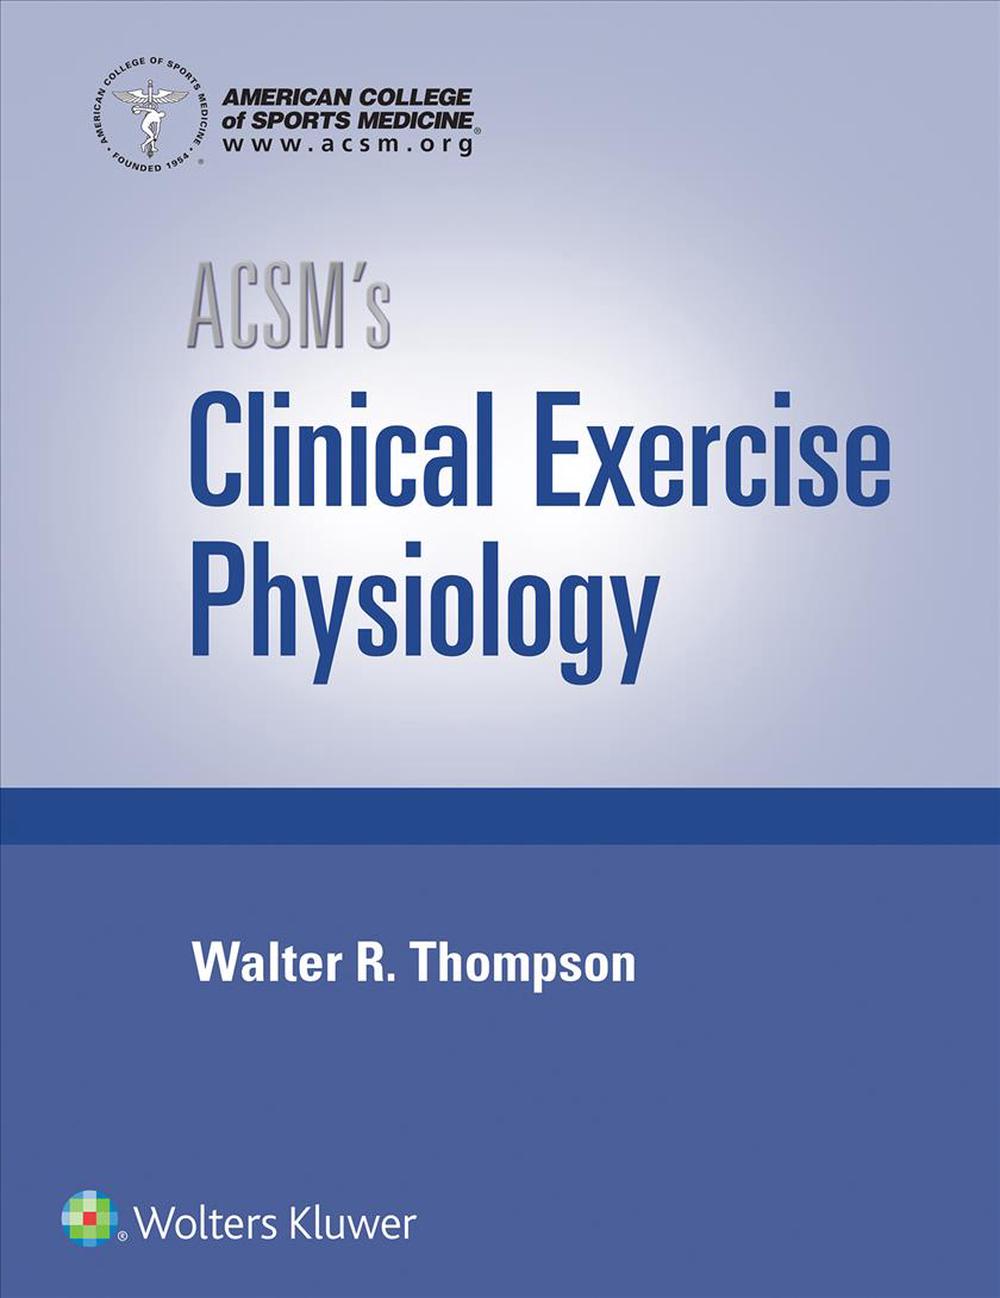 Nile　Exercise　9781496387806　at　by　Hardcover,　Edition　Physiology,　ACSM's　Clinical　College　online　Sports　of　1st　Buy　The　American　Medicine,